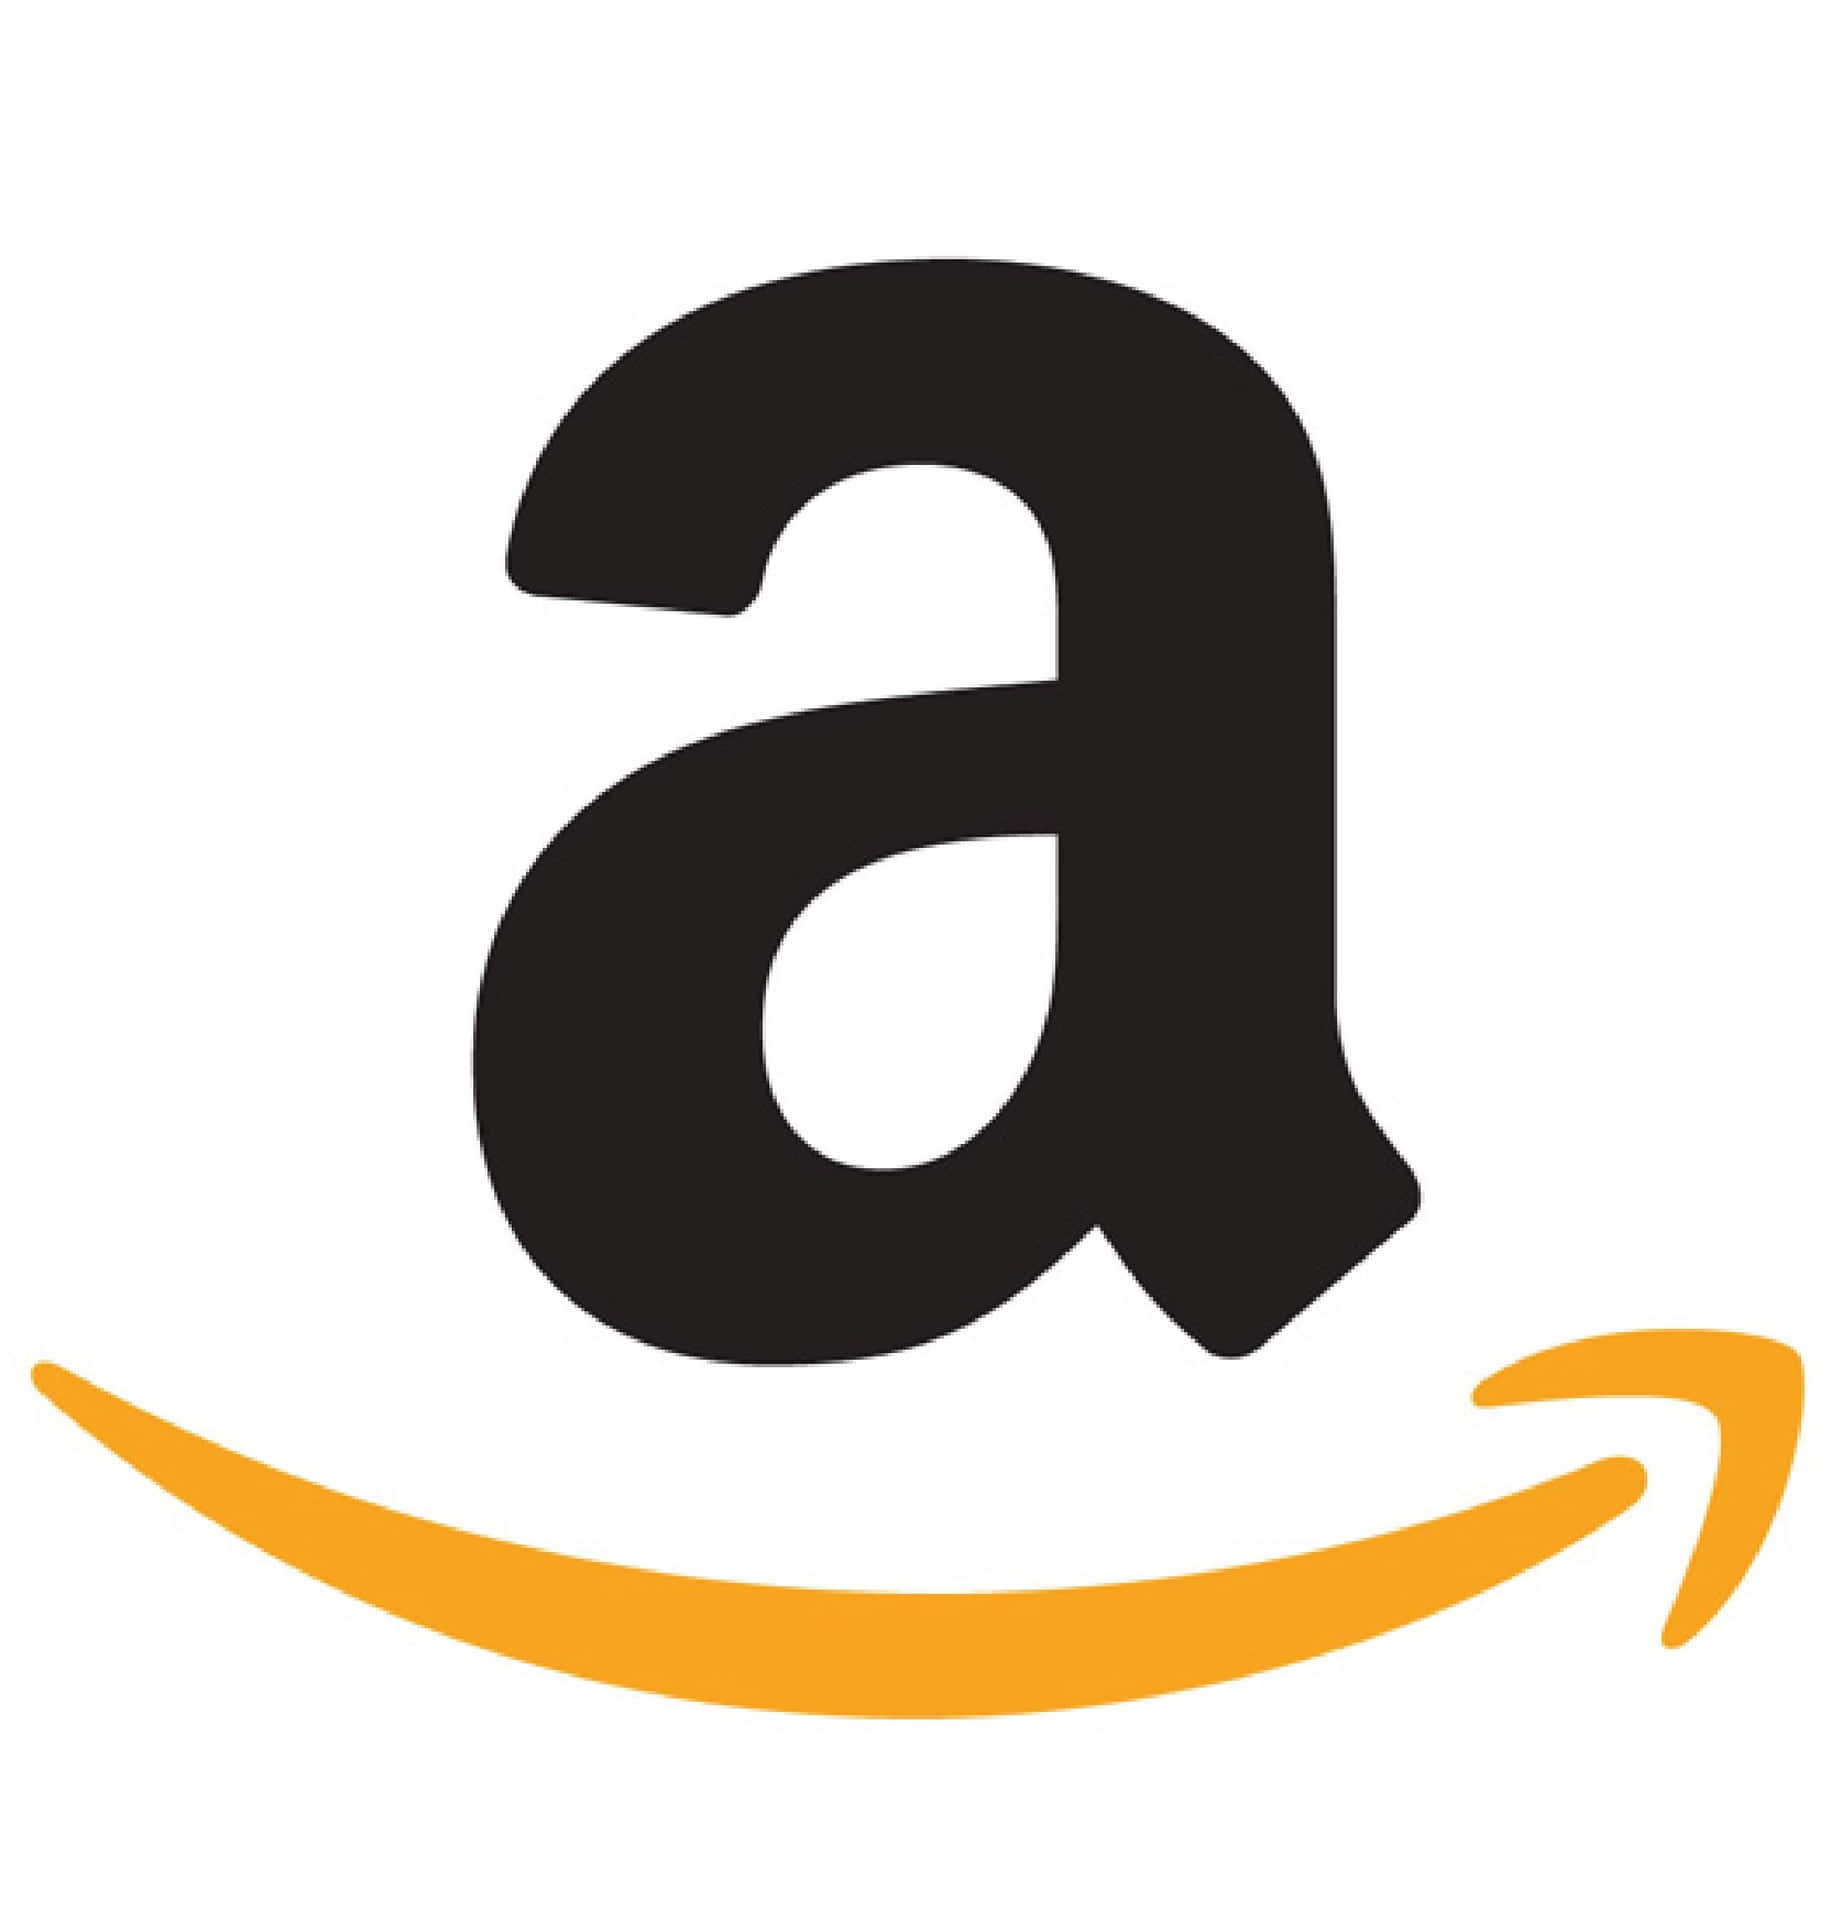 Experience convenience and reliability with Amazon